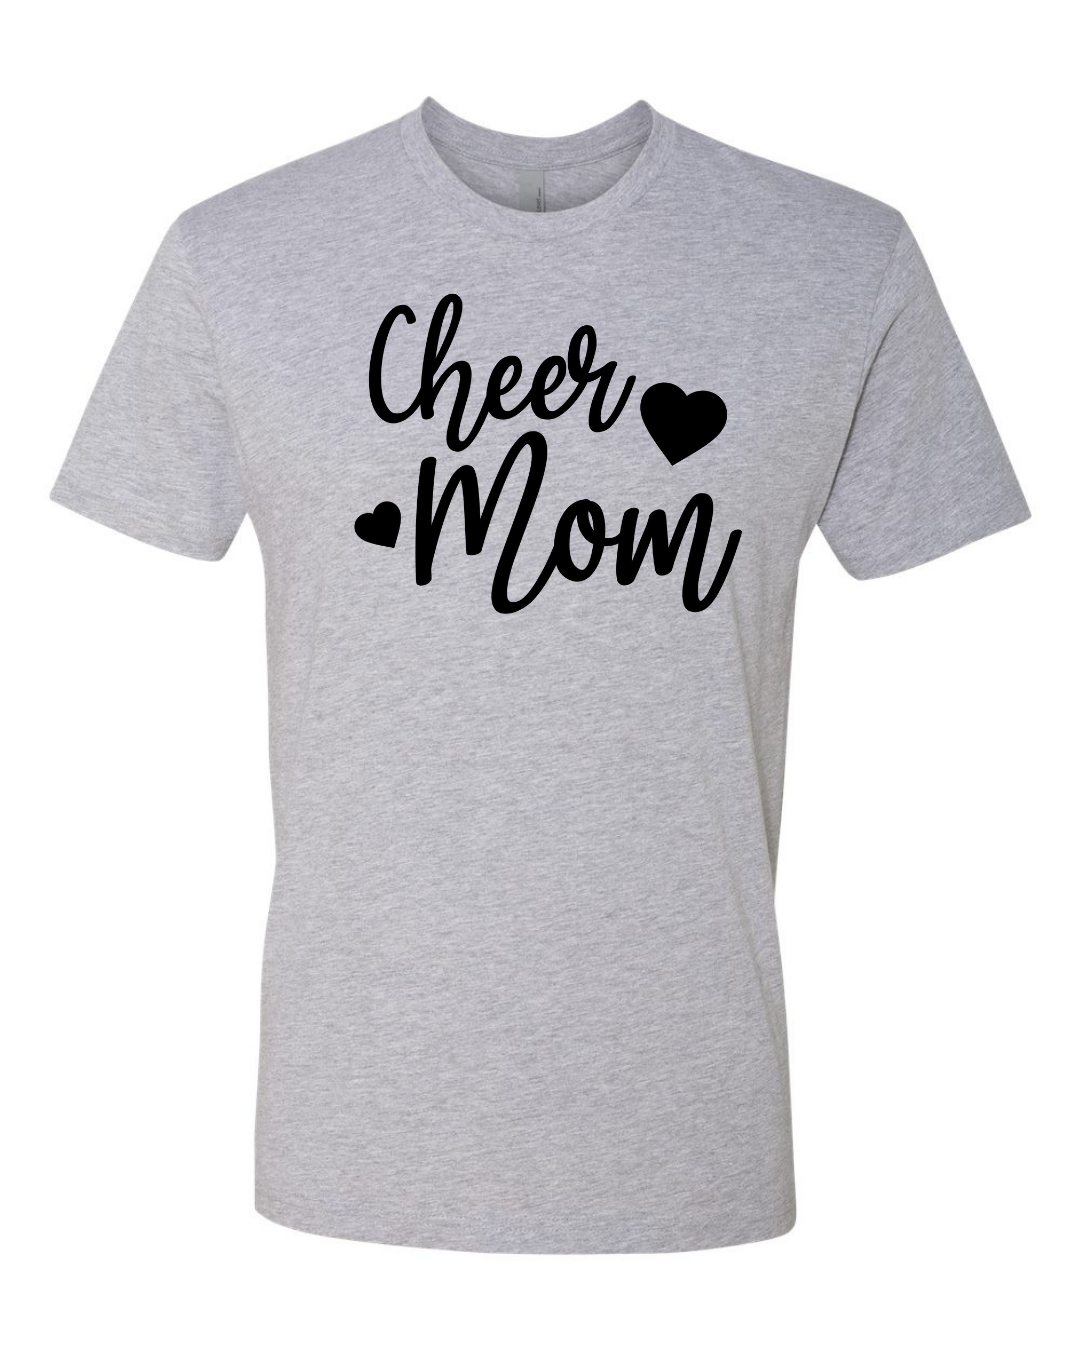 Cheer Mom with hearts